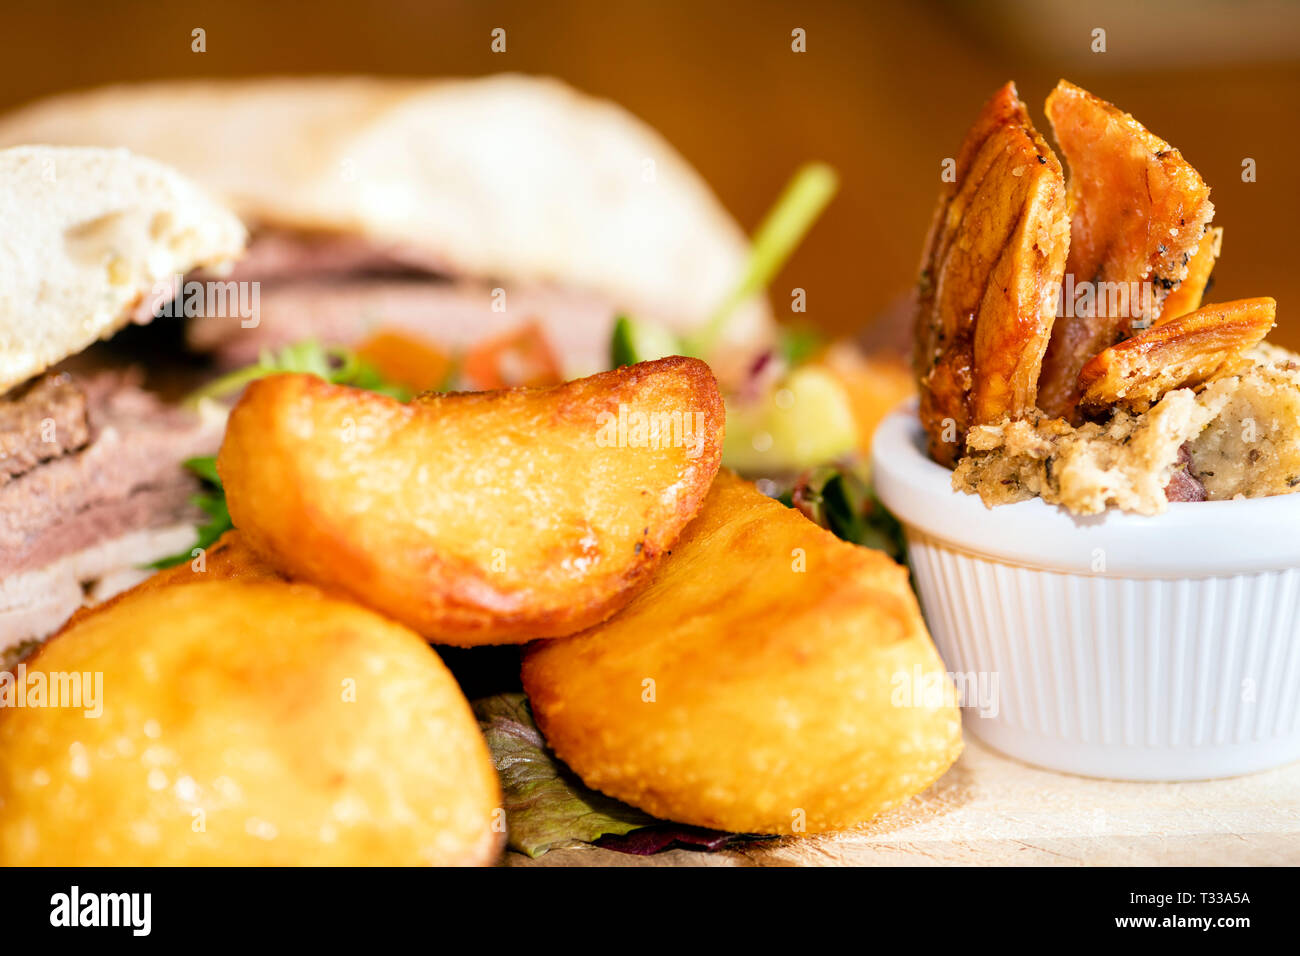 Pub meal with roast potatoes, pork crackling, stuffing and a ciabatta meat sandwich, UK. Stock Photo